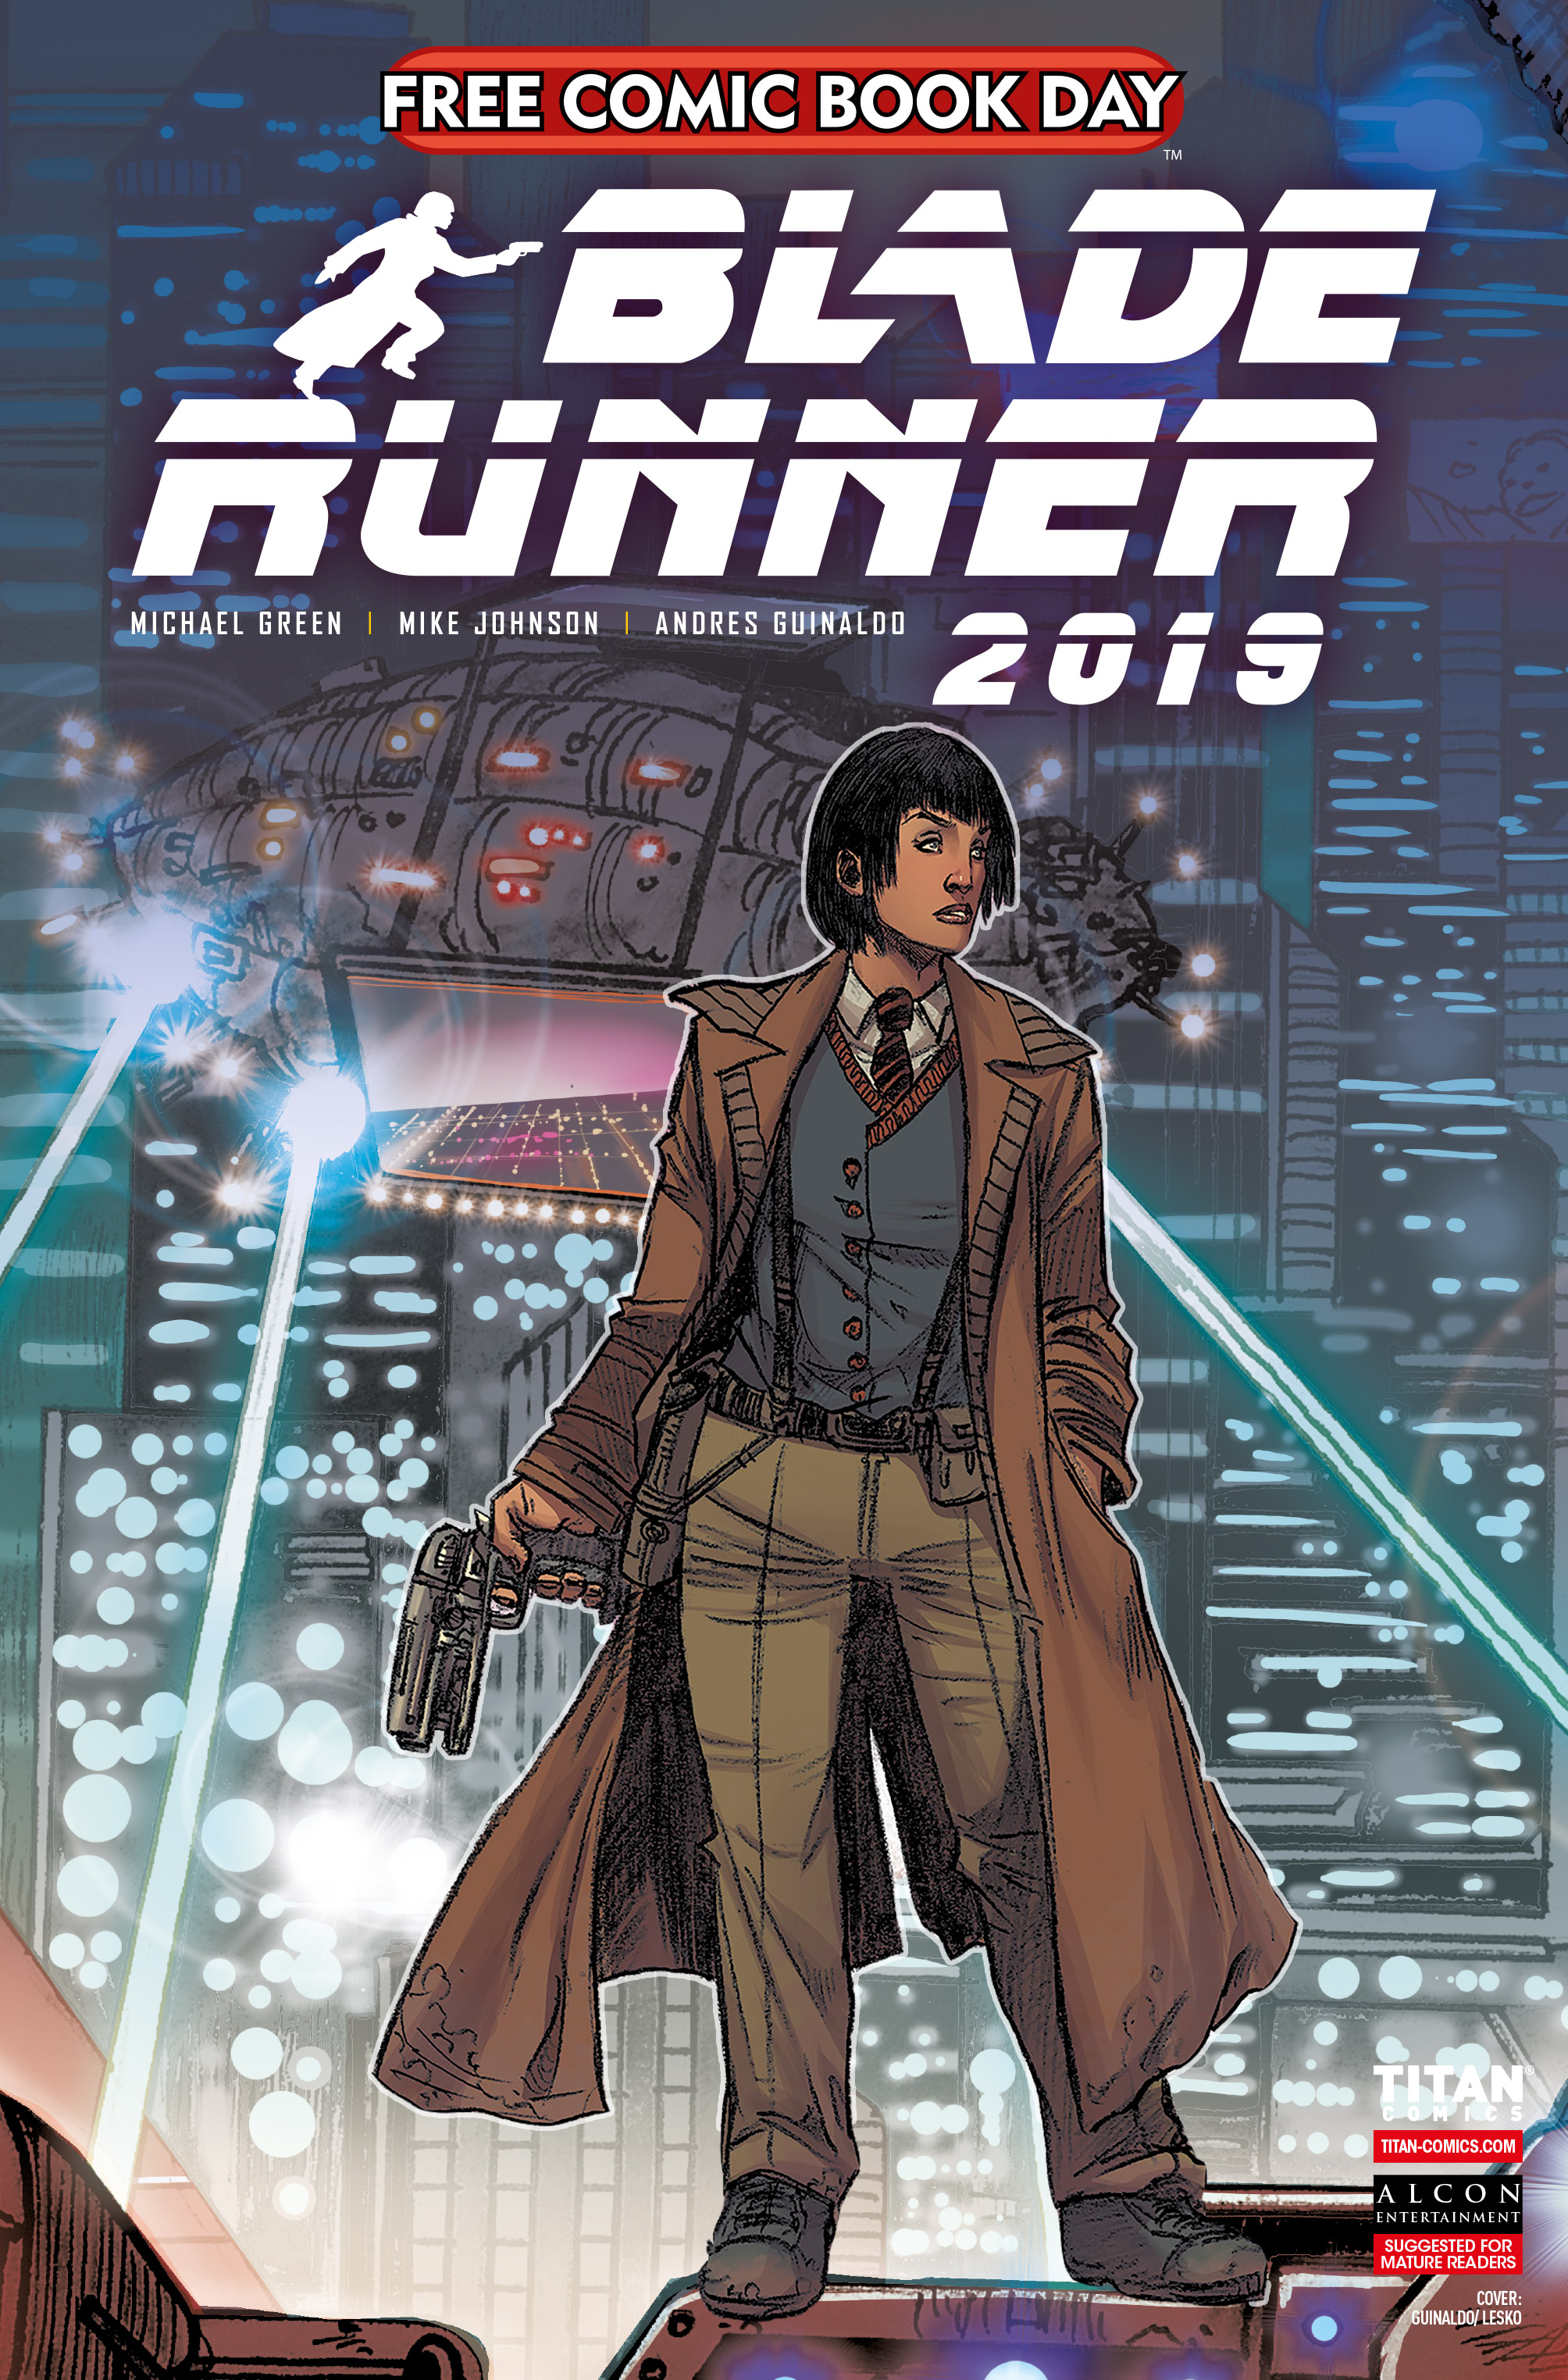 FCBD 2020 Collection: Chapter bladerunner2019 - Page 1